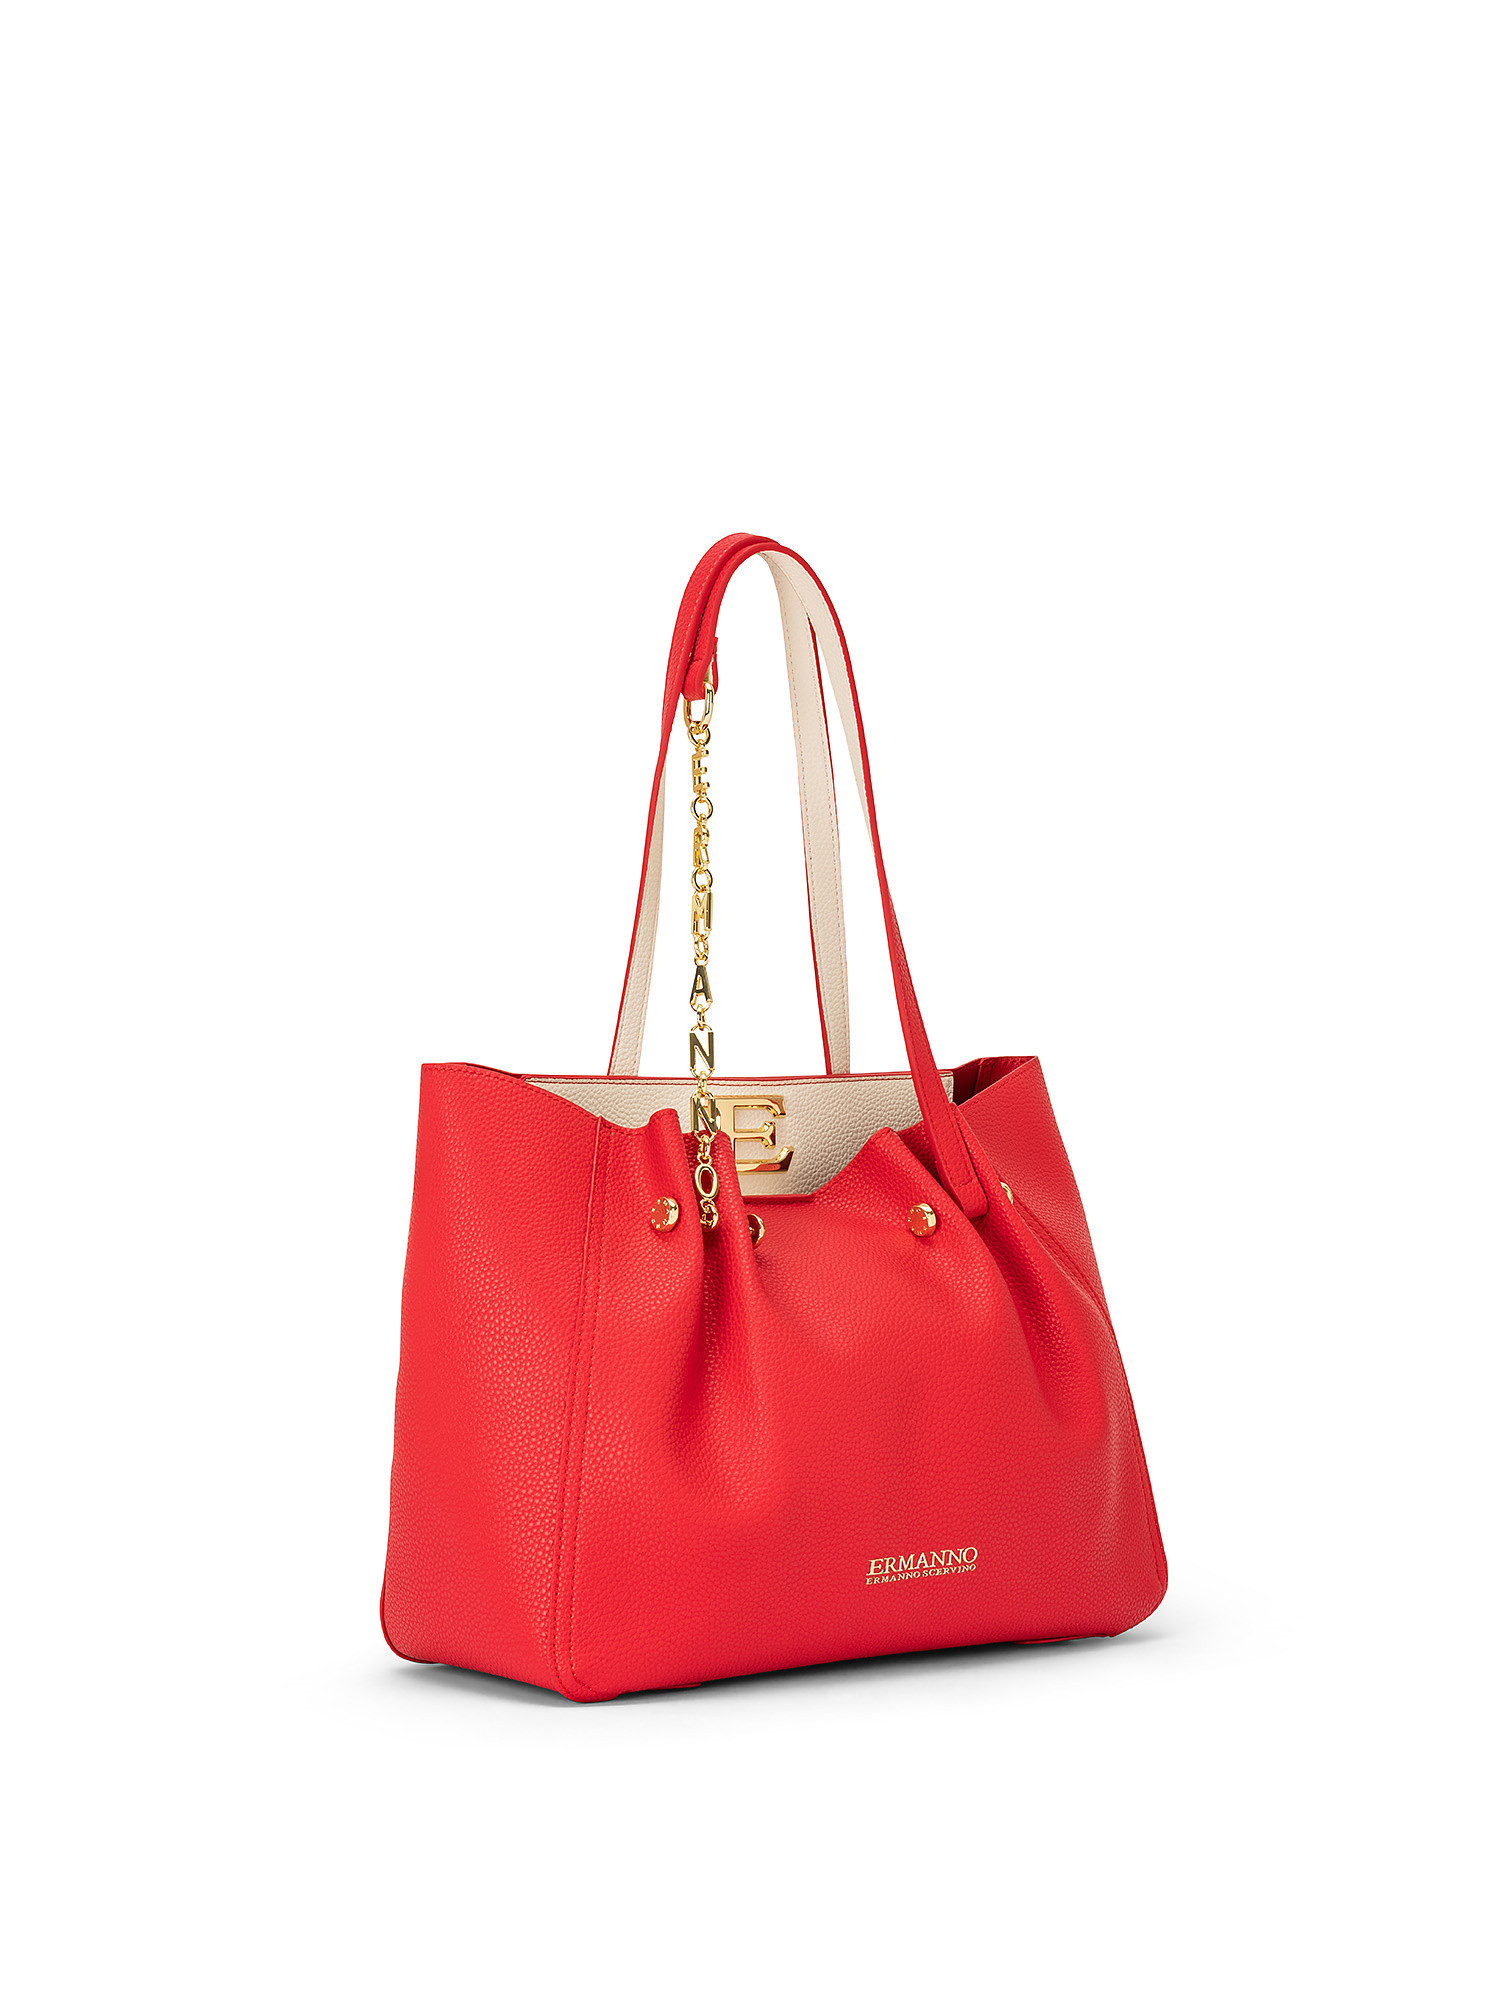 Giovanna small bag, Red, large image number 1